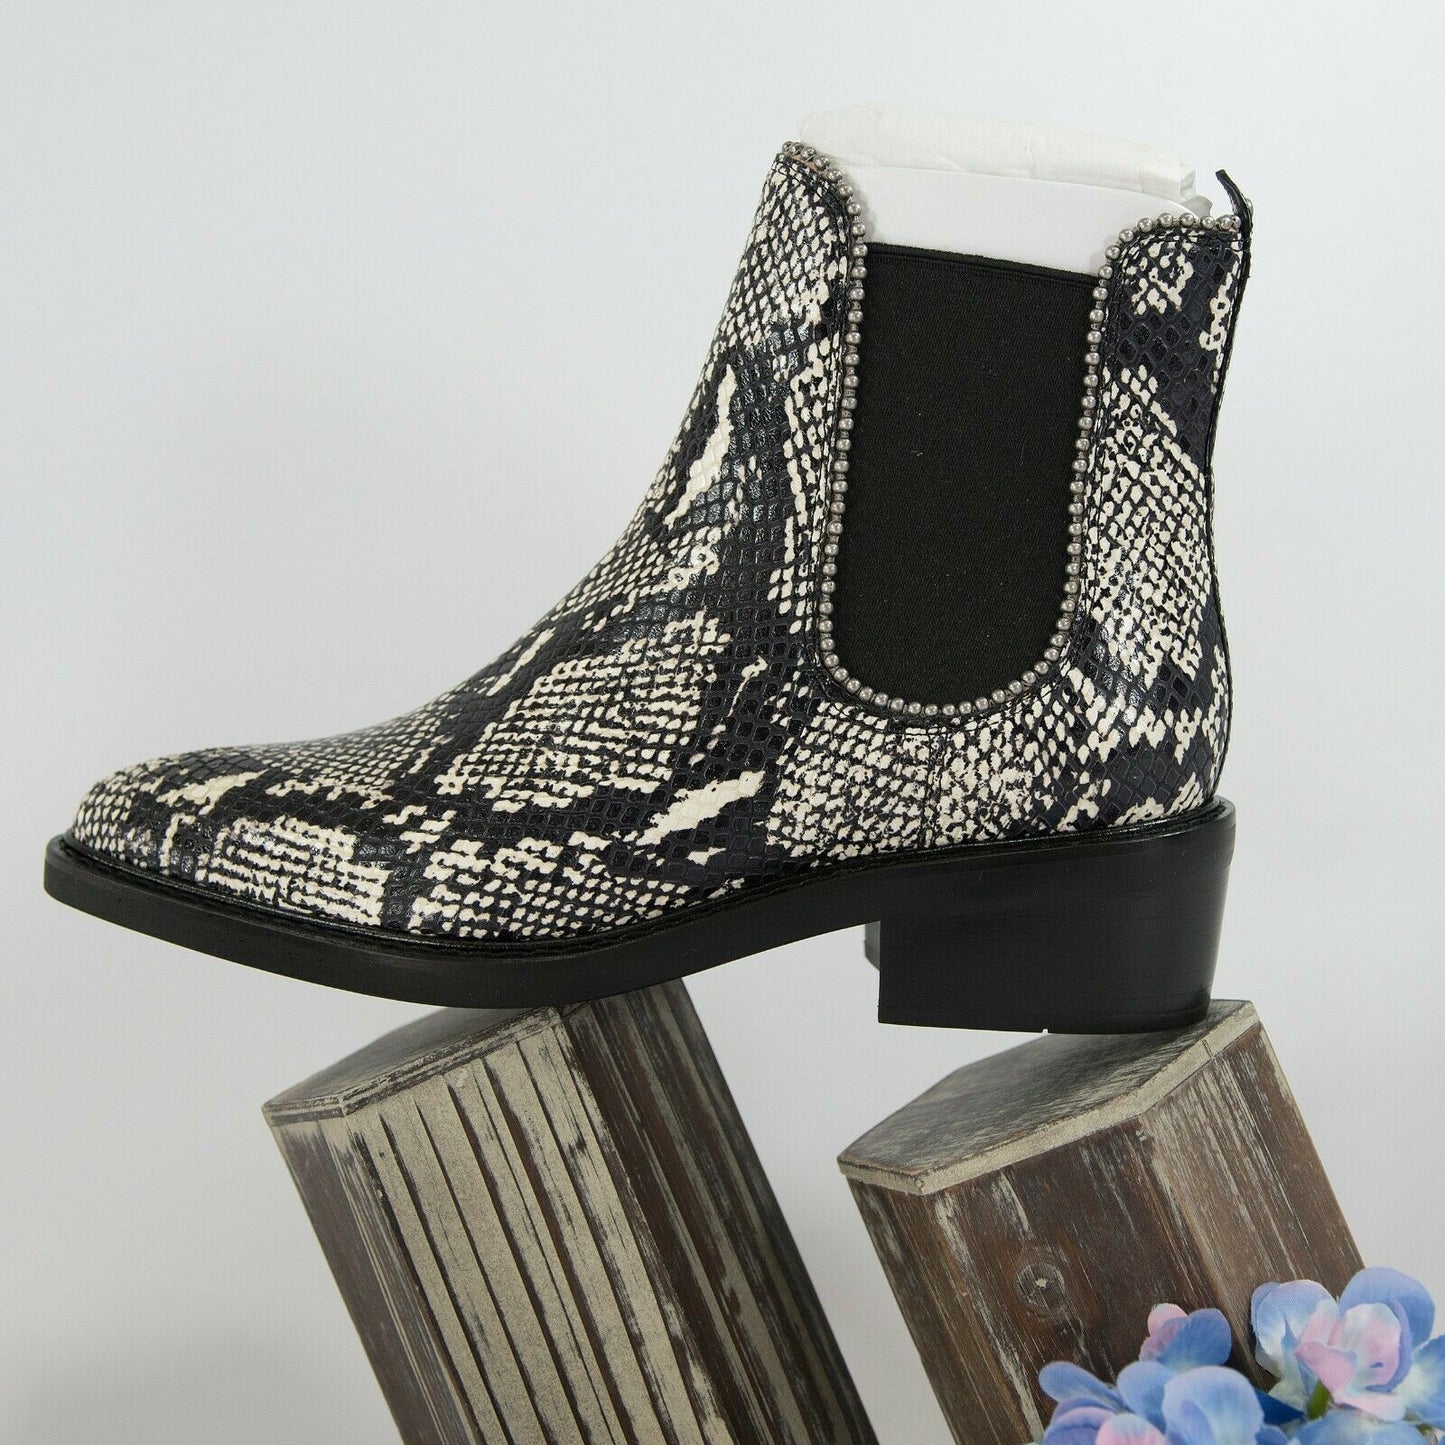 Coach Snake Leather Bowery Beaded Bootie Boots Size 6 NIB